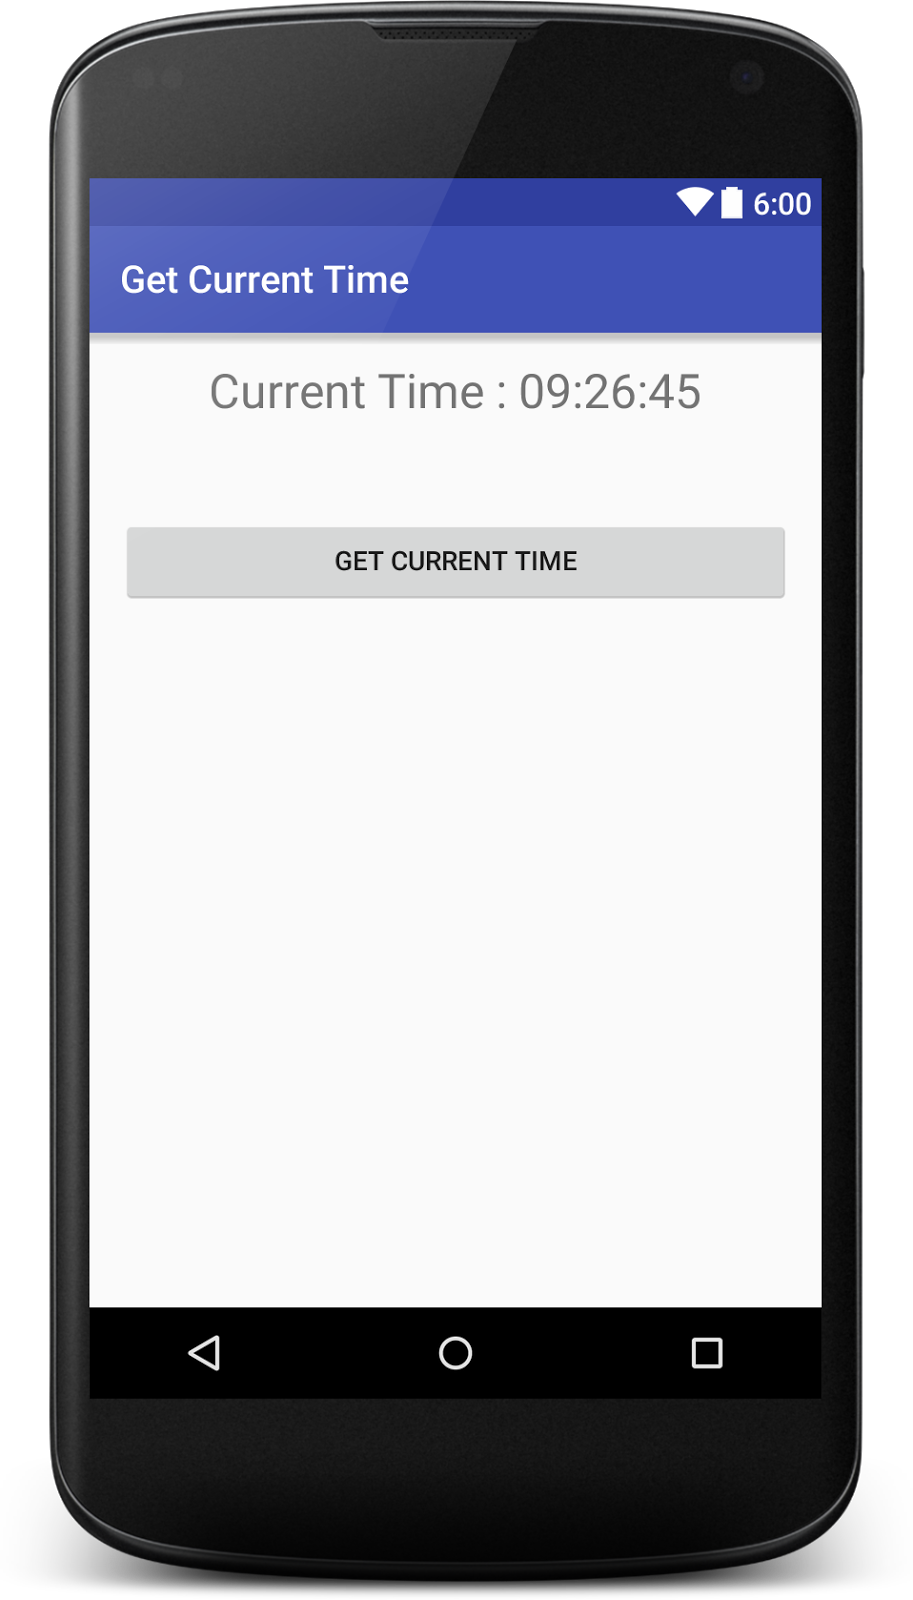 Get Current Time in Android Programmatically